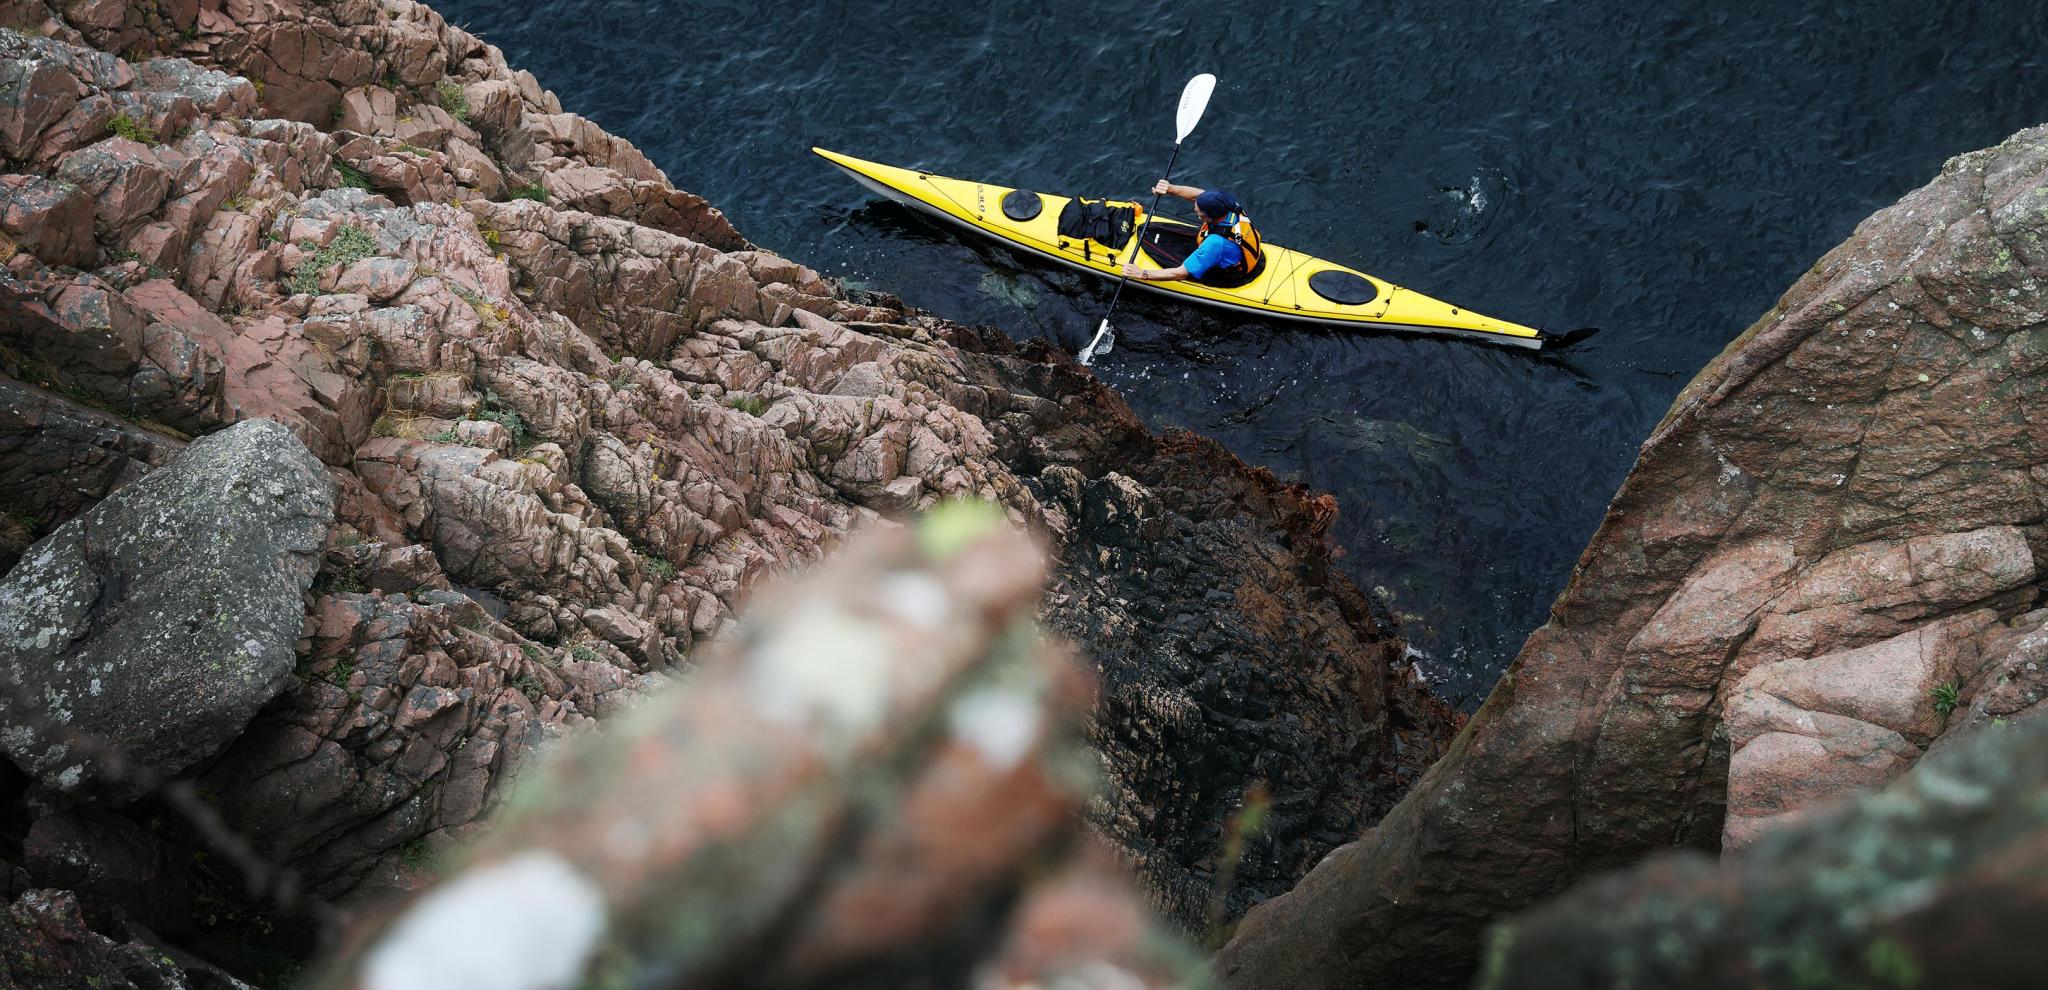 View of a man canoeing from above